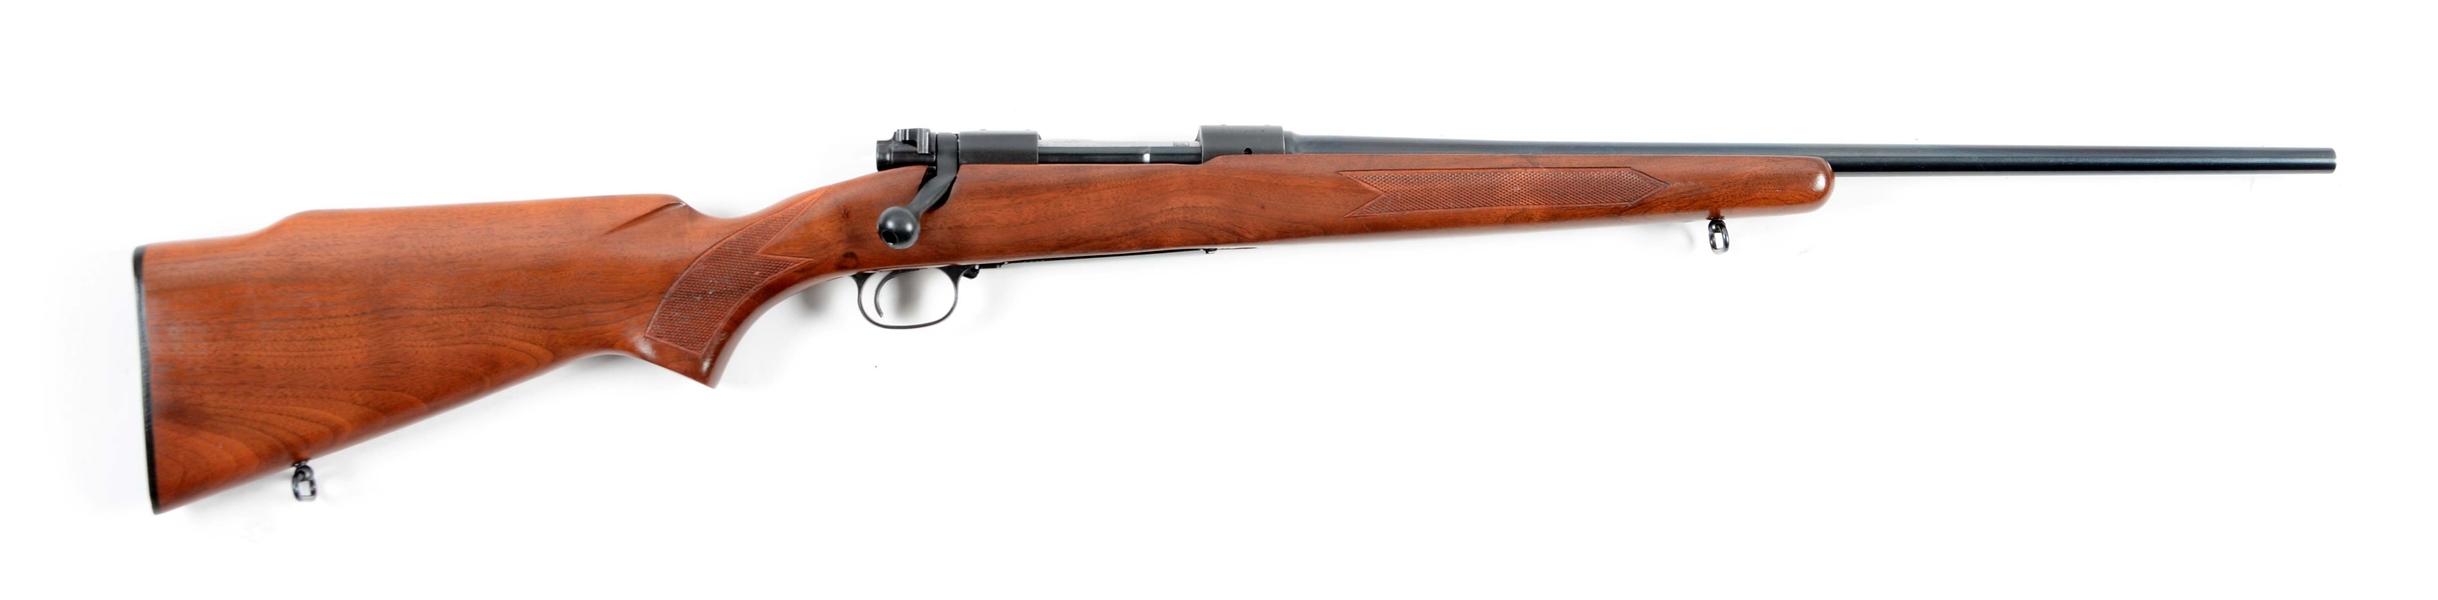 (C) PRE-64 WINCHESTER .270 MODEL 70 FEATHERWEIGHT BOLT ACTION RIFLE (1961).